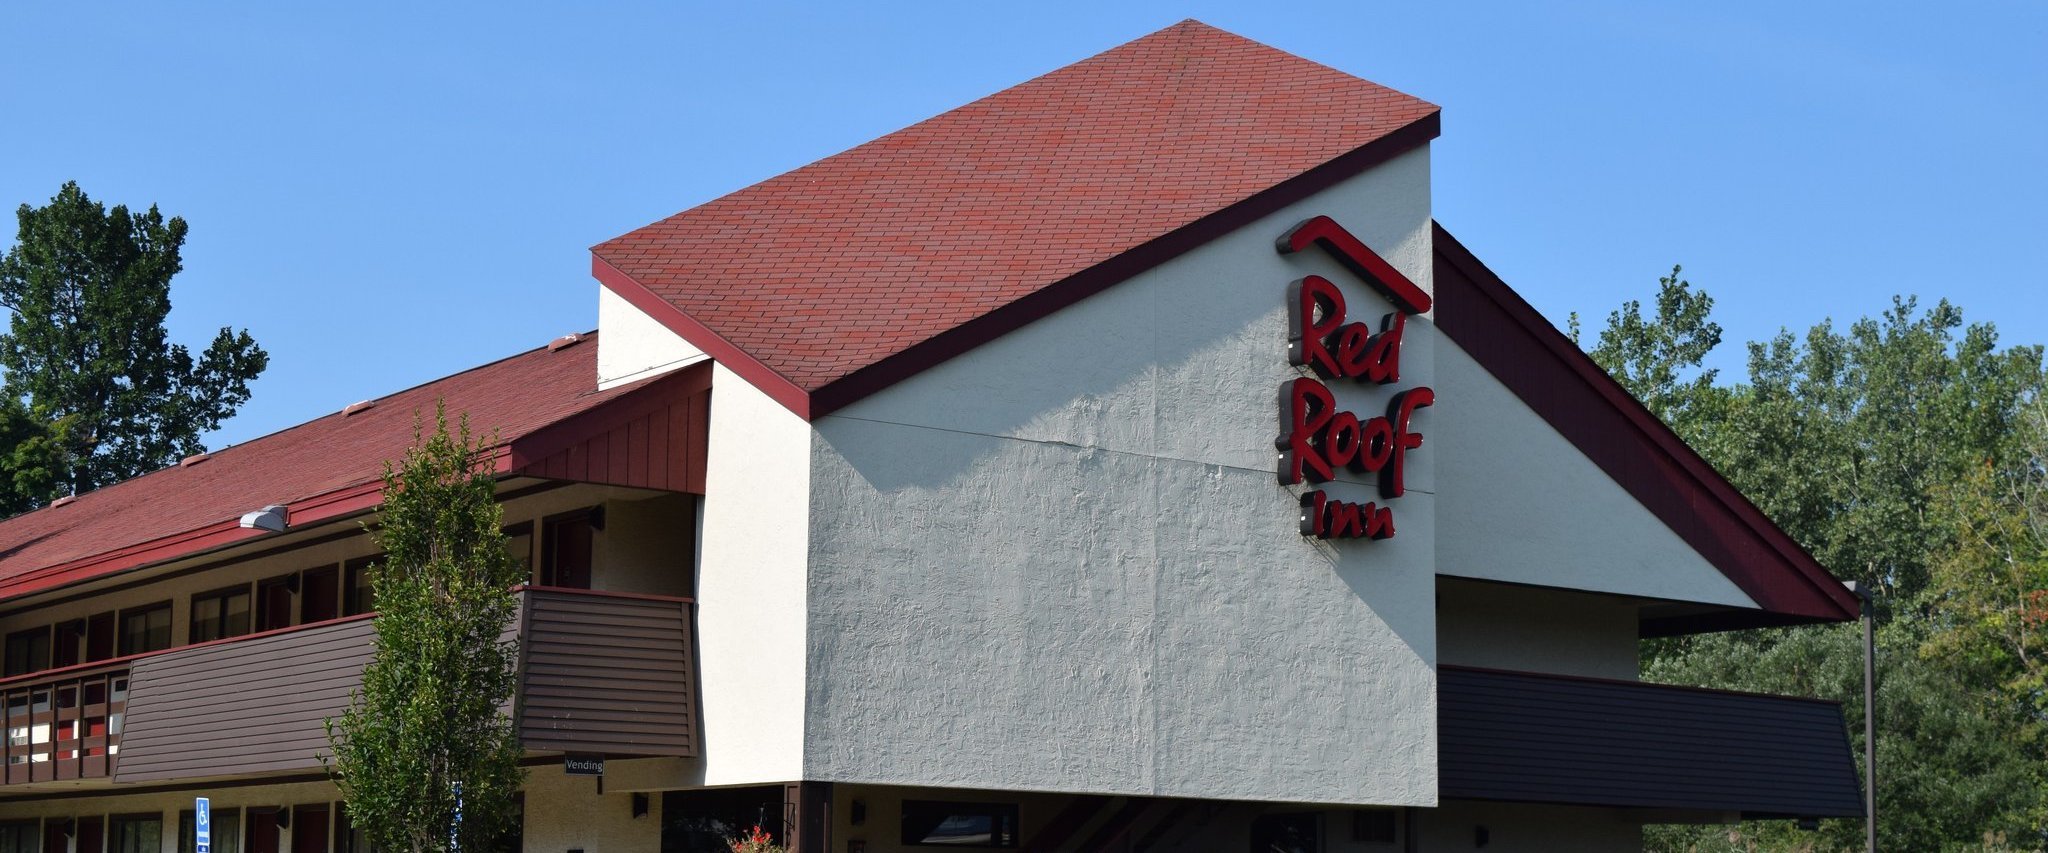 Photo of Red Roof Inn Buffalo - Niagara Airport, Bowmansville, NY